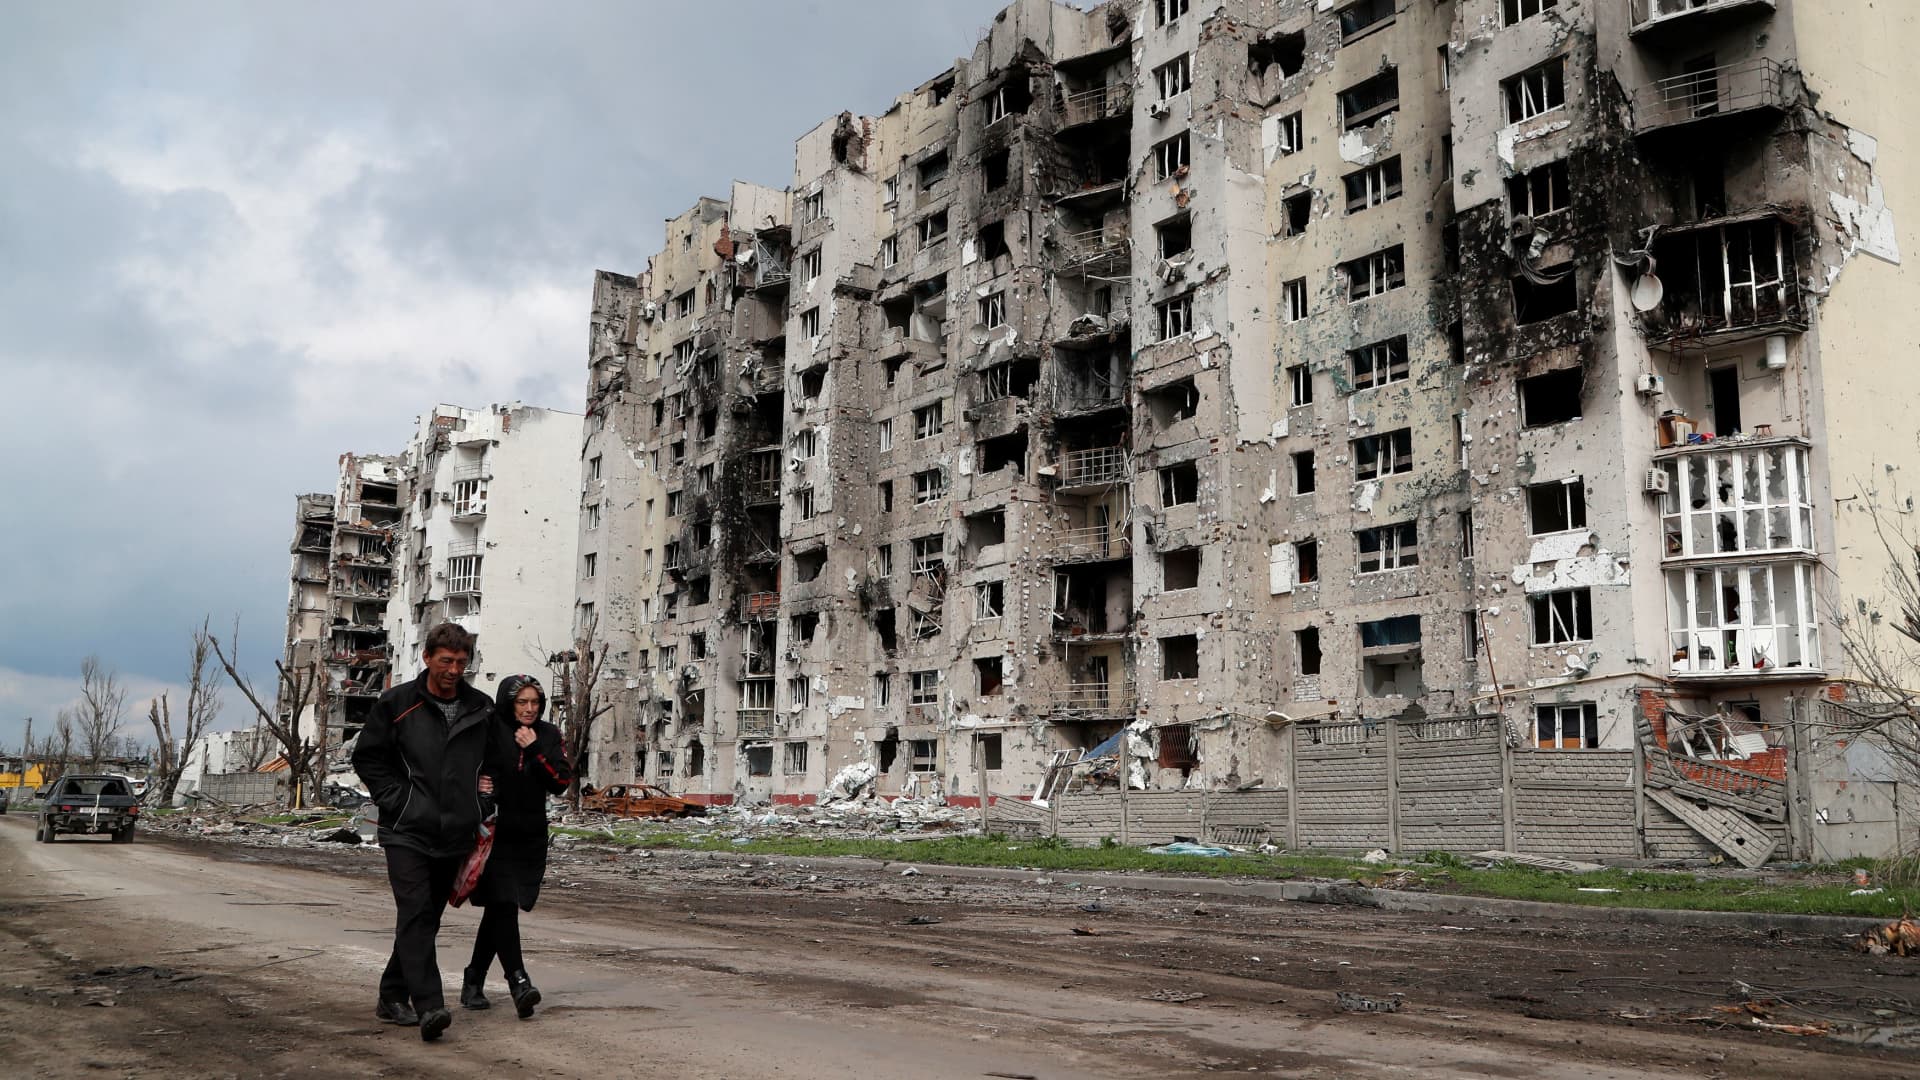 People walk along a street near residential buildings destroyed during Ukraine-Russia conflict in the southern port city of Mariupol, Ukraine April 22, 2022.